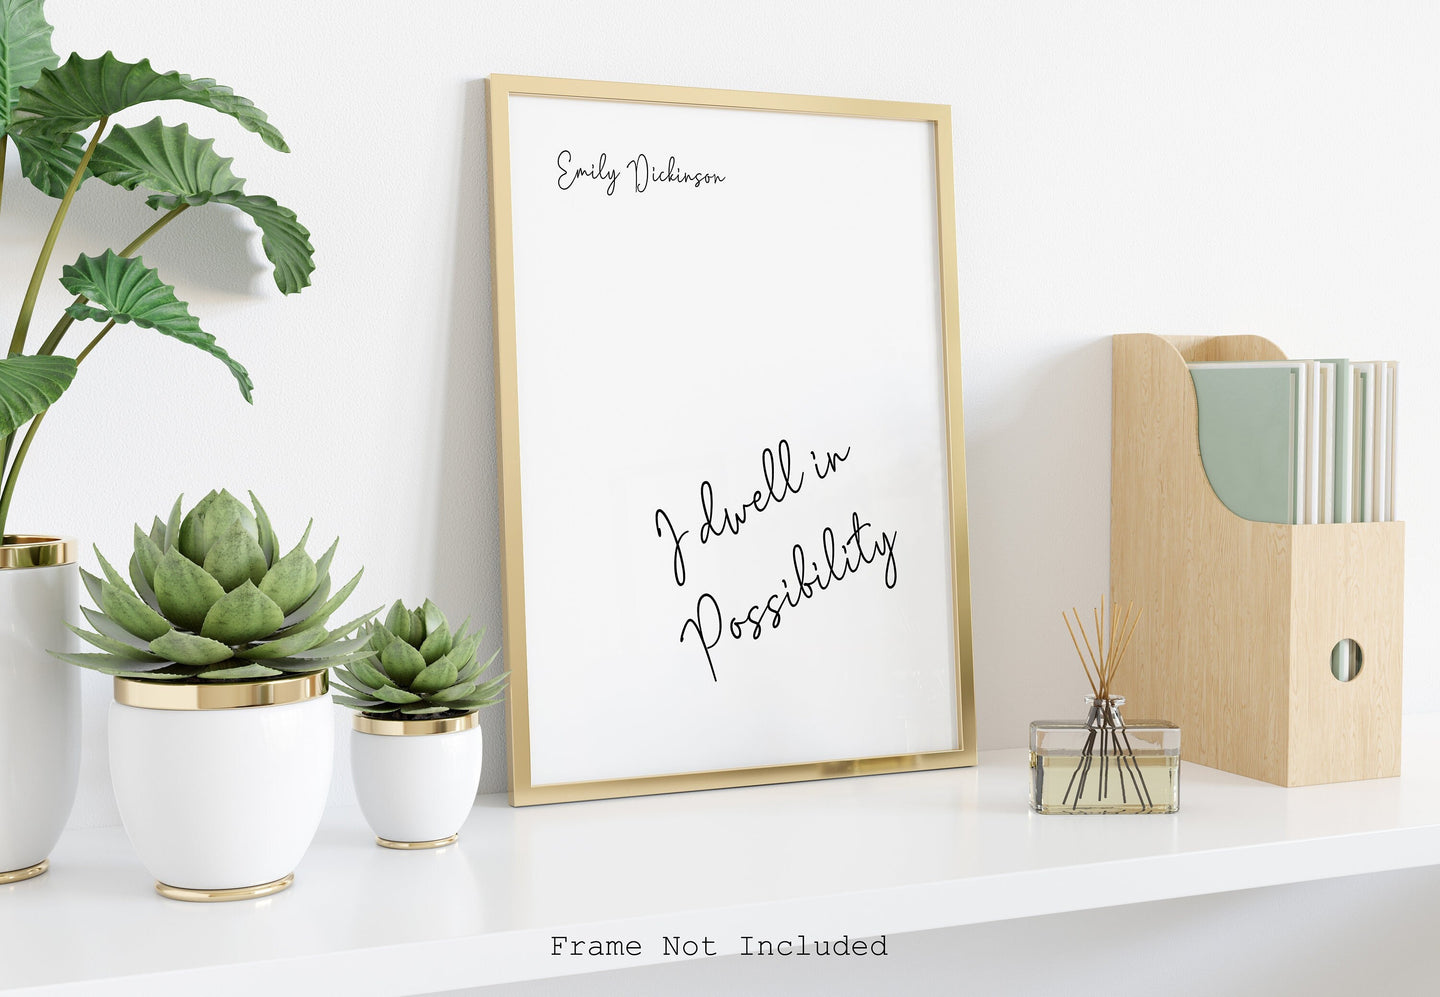 I dwell in Possibility - Emily Dickinson - Poetry Wall art